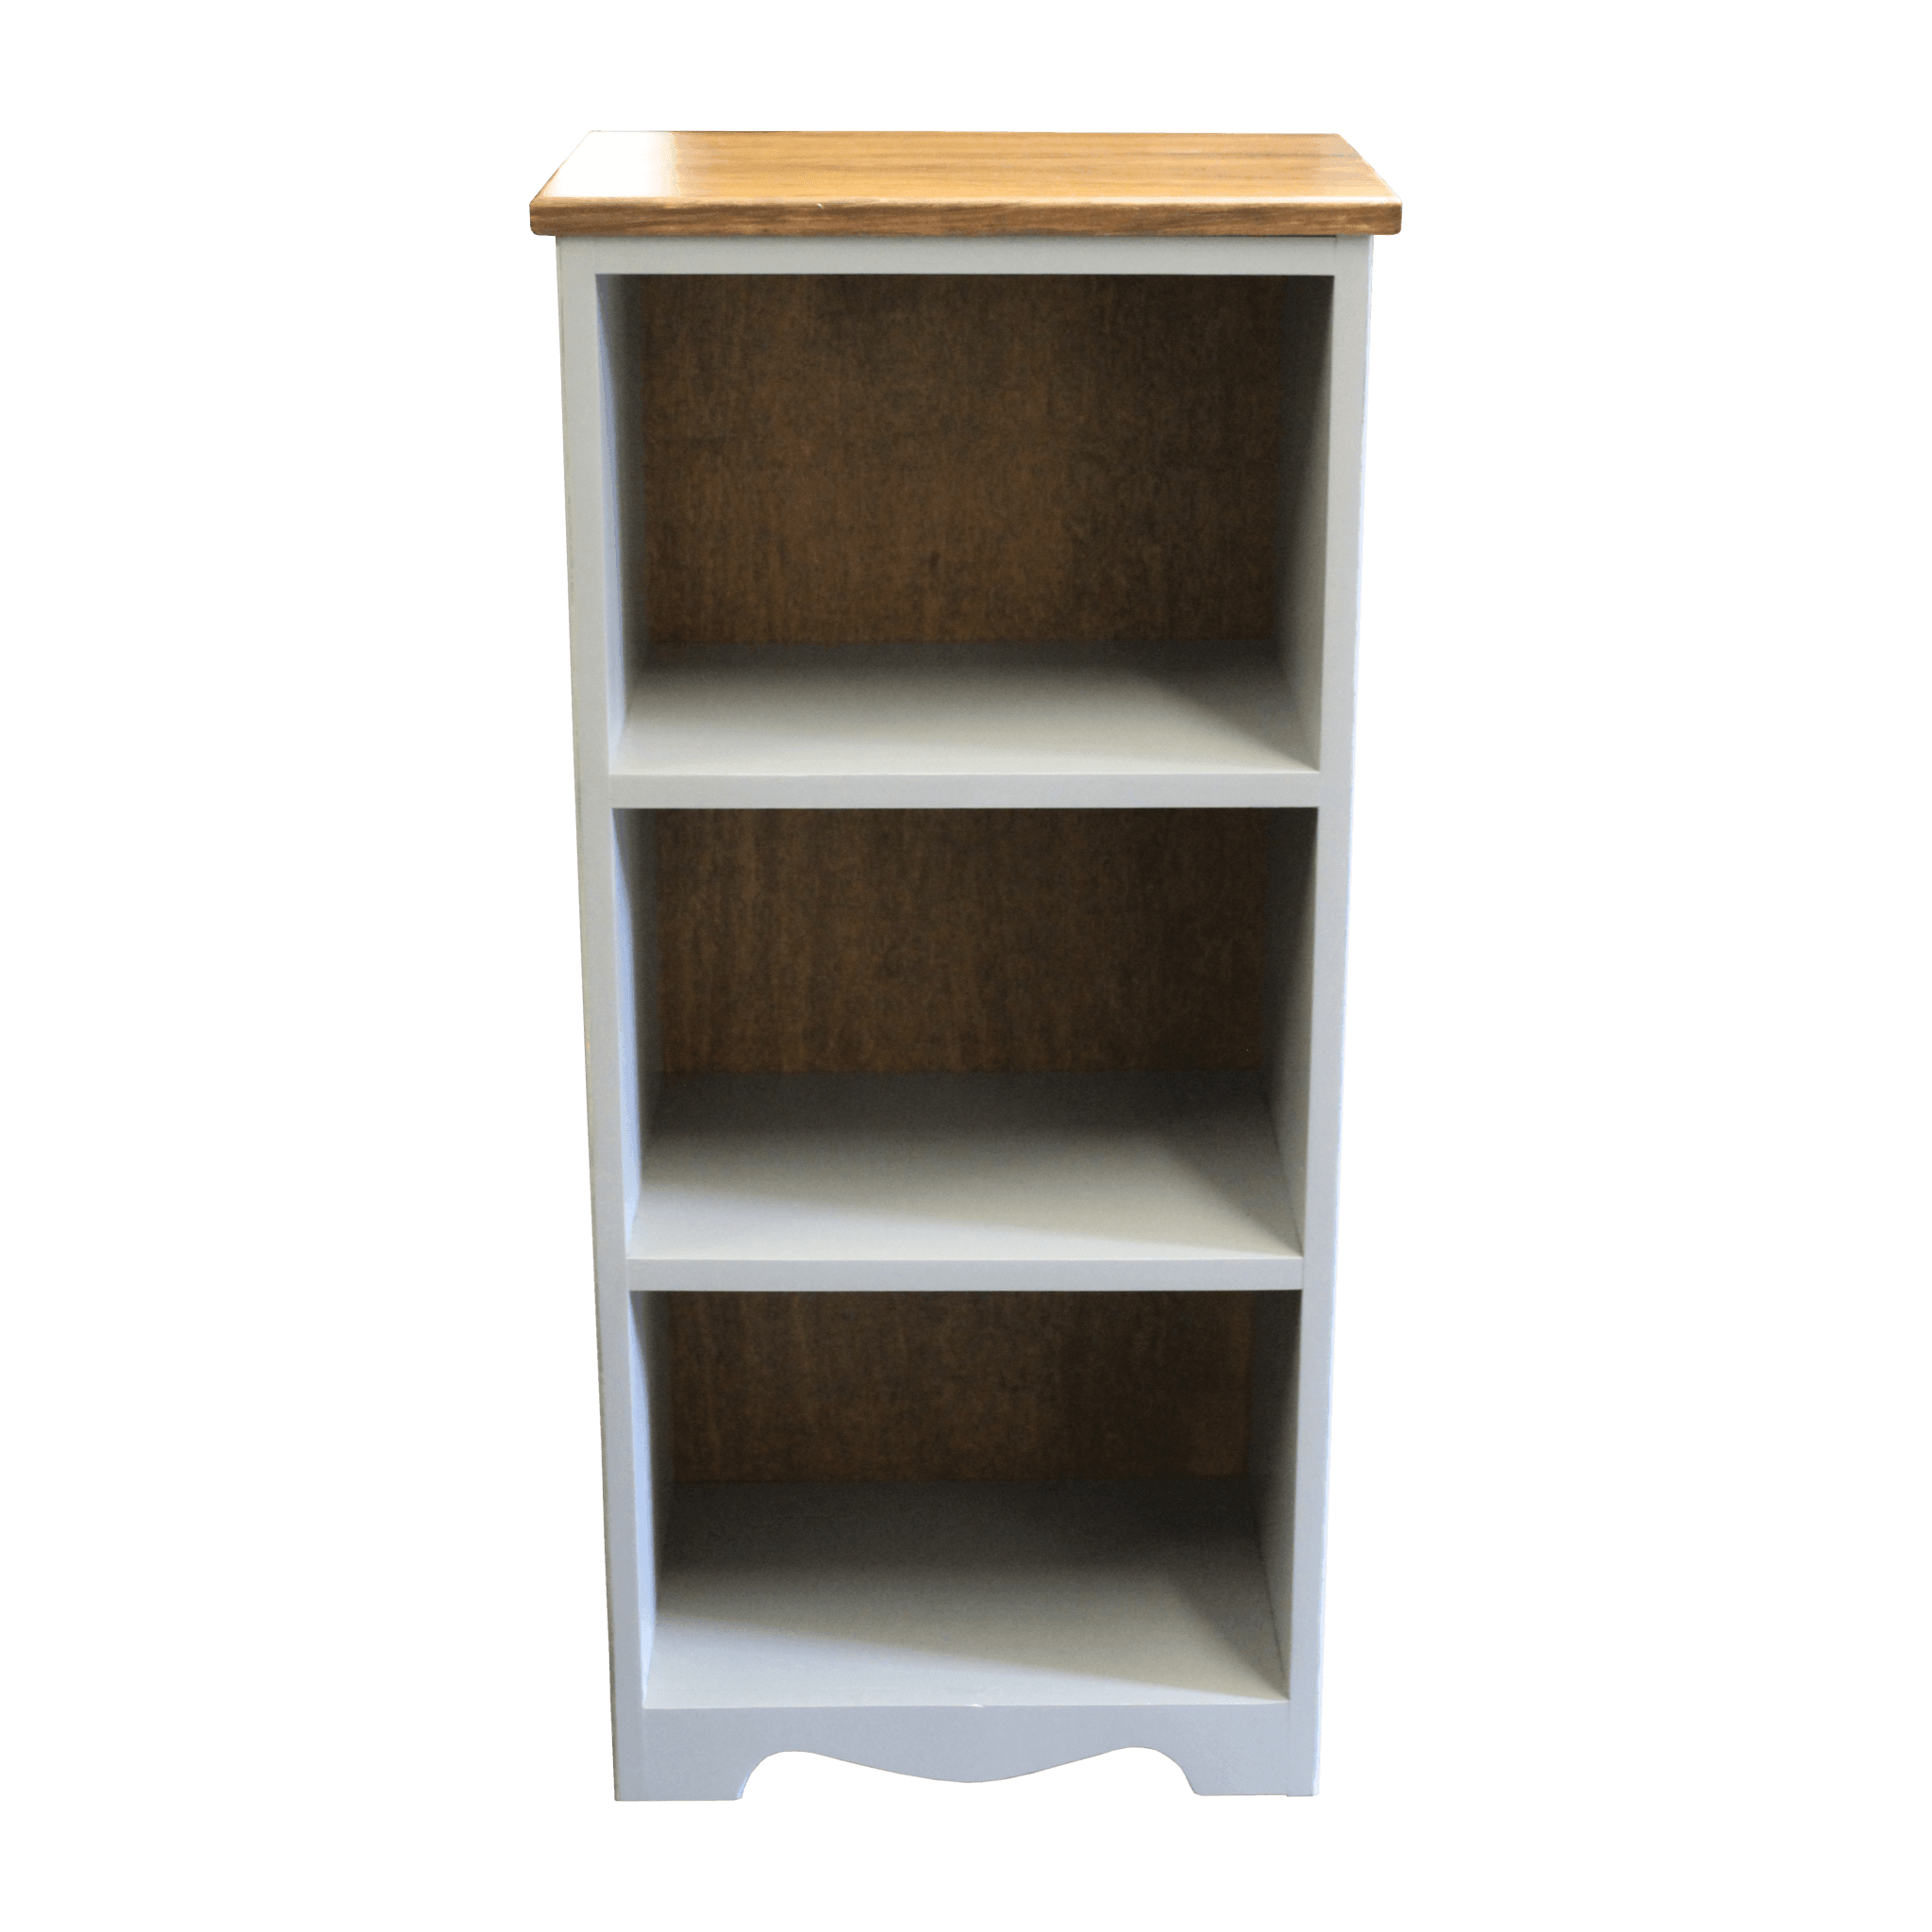 Single Cubby Cabinet